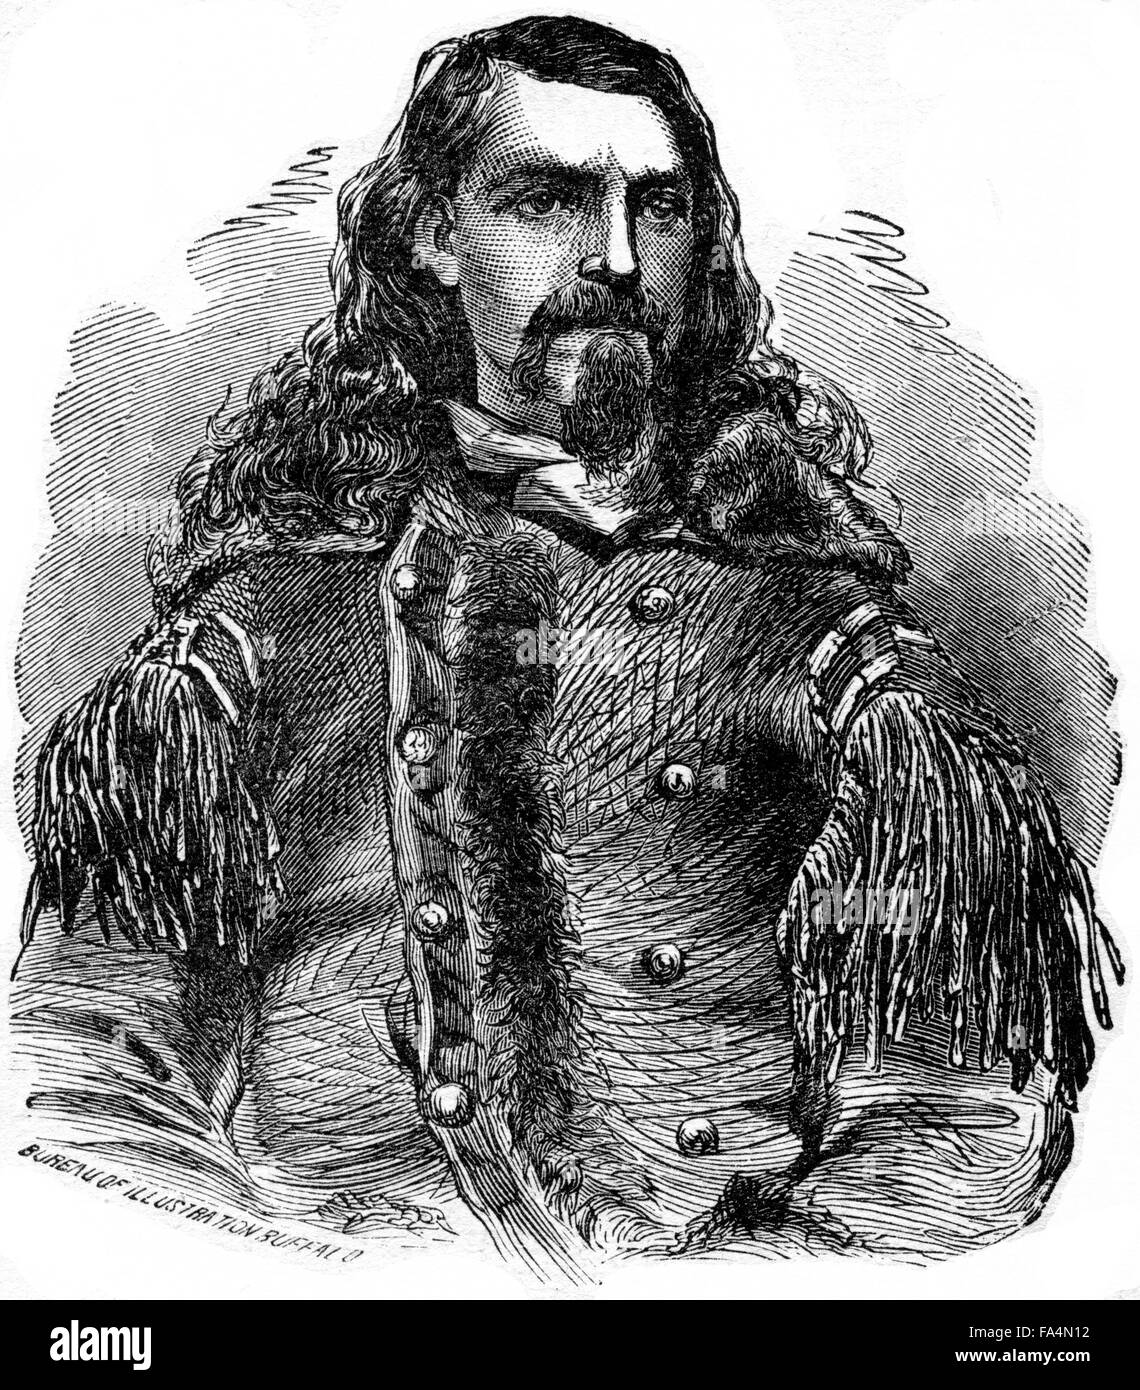 “The Famous Scout Buffalo Bill”, William Frederick Cody (1846-1917), by Artist John Reuben Chapin, 1870, Book Illustration from “Indian Horrors or Massacres of the Red Men”, by Henry Davenport Northrop, 1891 Stock Photo